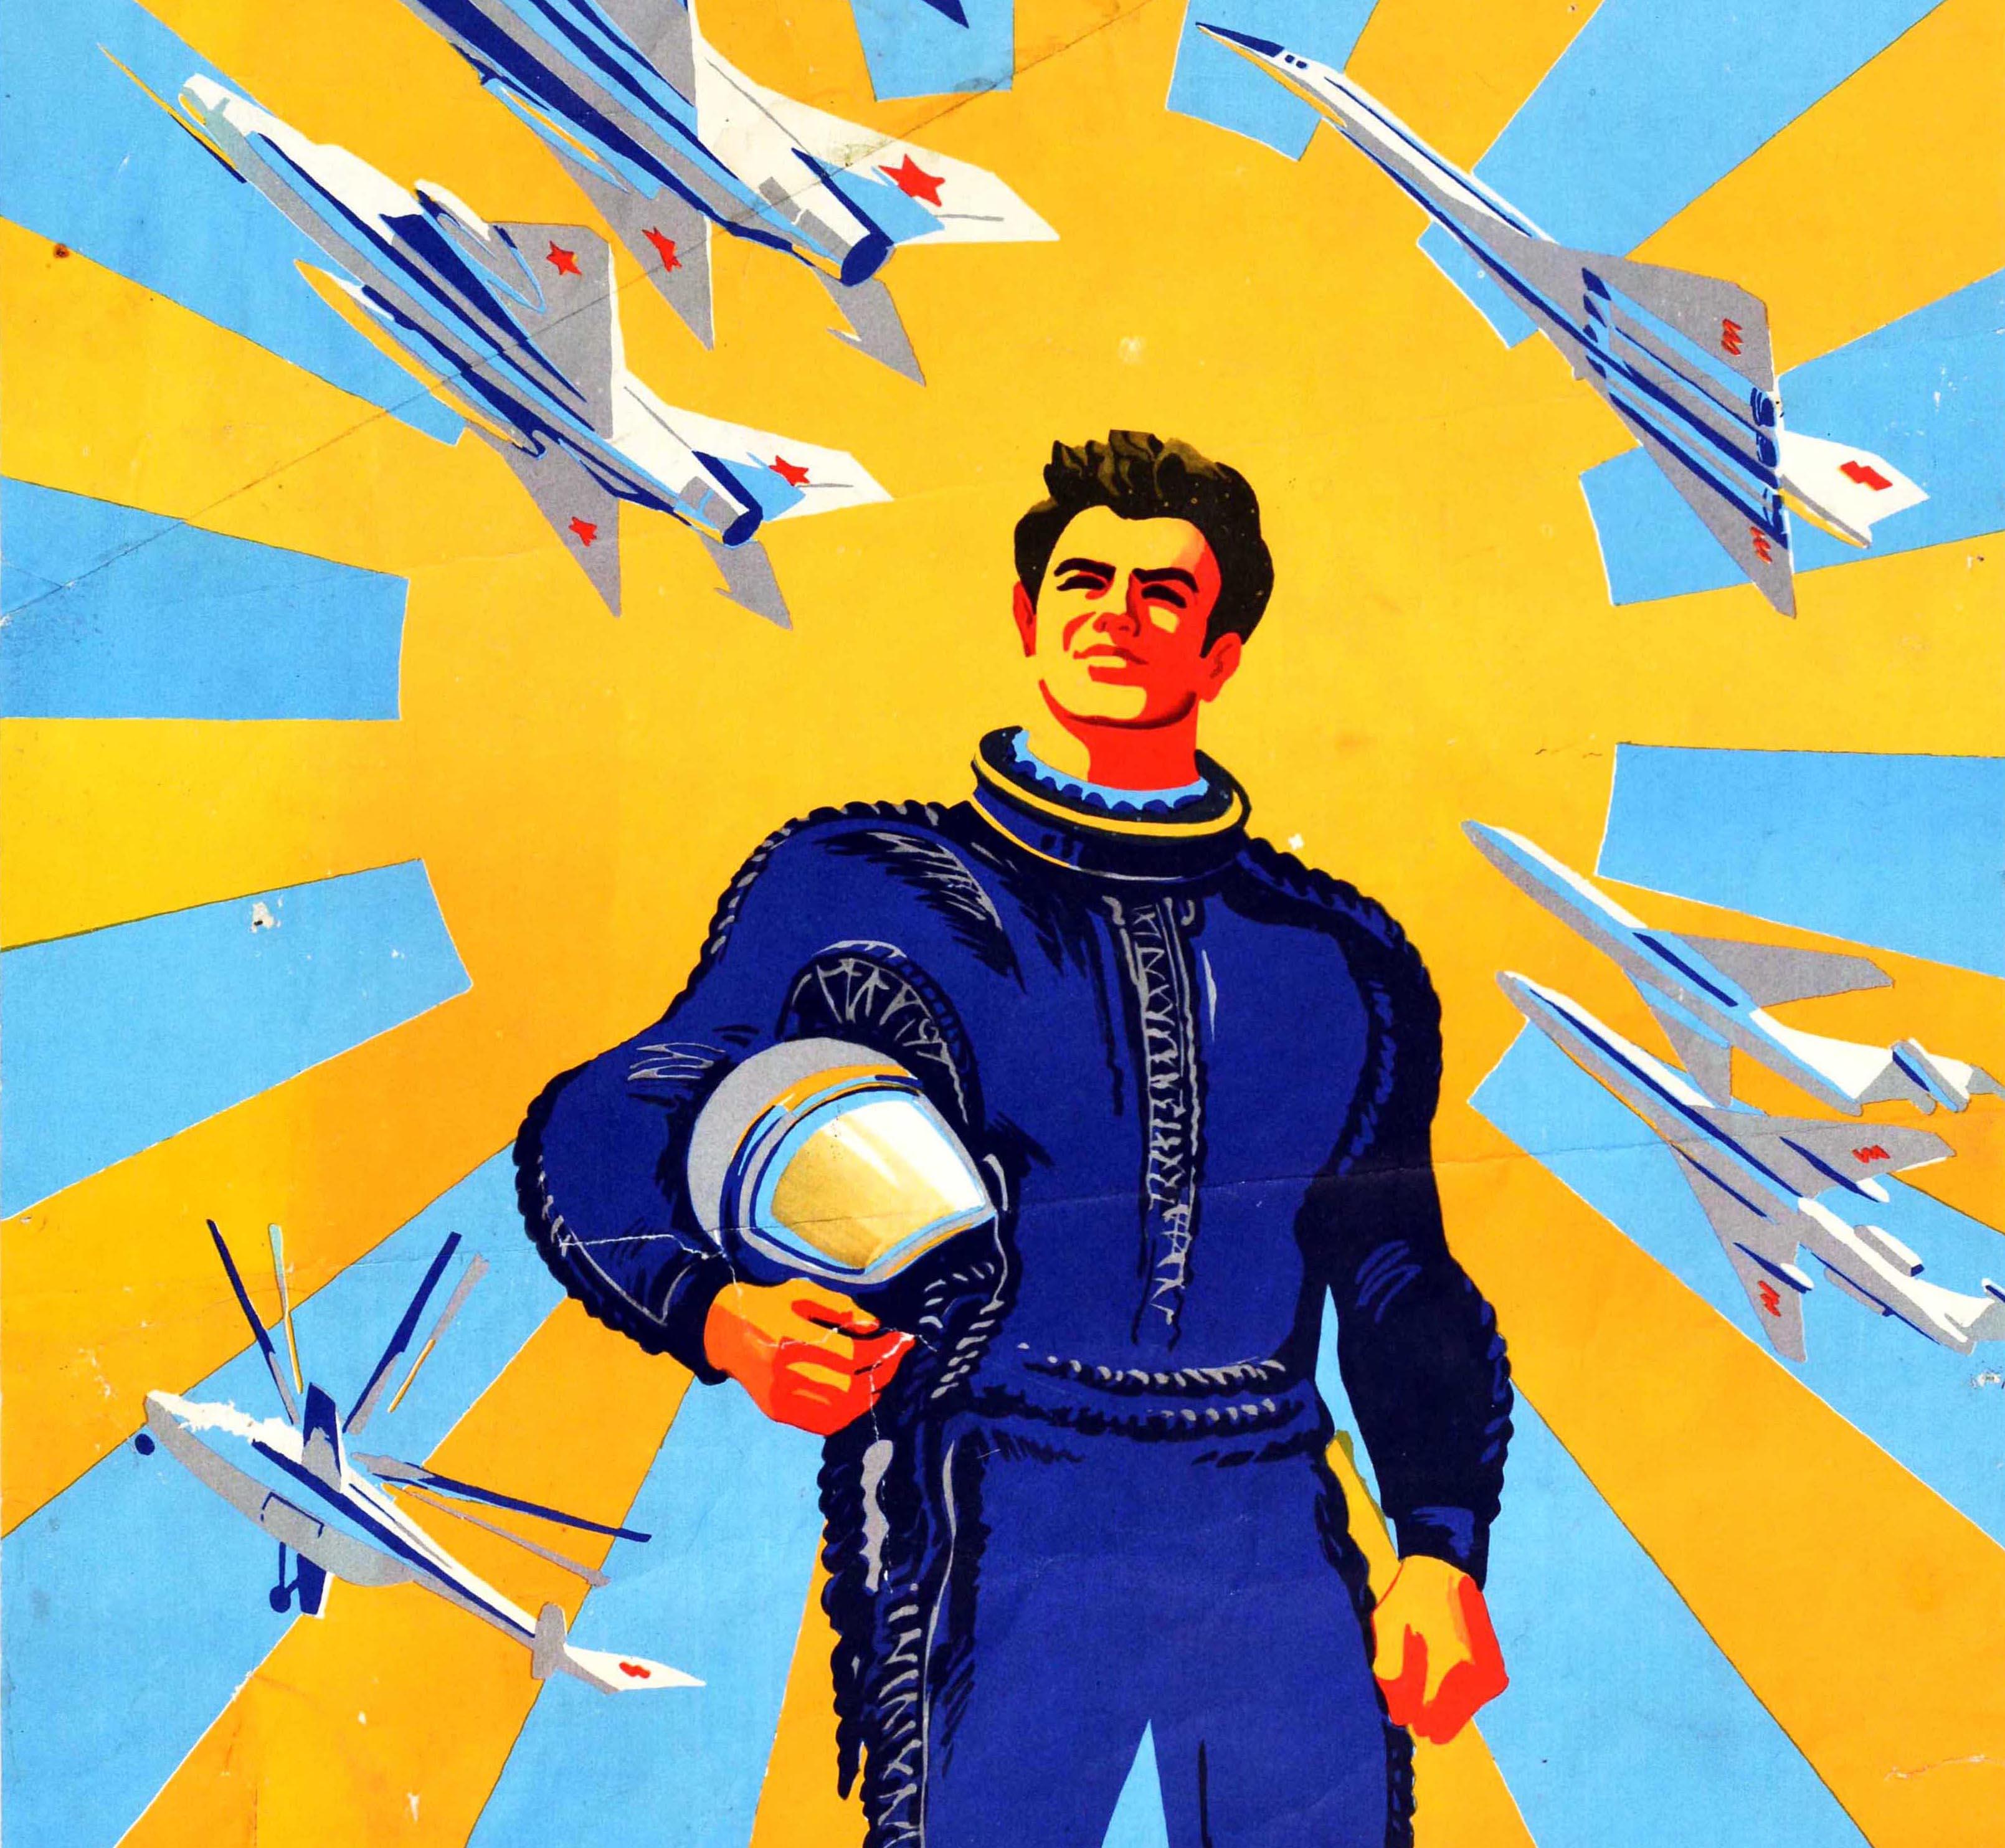 Original vintage Soviet Air Force military propaganda poster - ??? ?????? ?????? ???? ?? ?????? ? ?? ????! The Motherland gave us wings for heroic deeds and work! Dynamic design depicting a pilot in uniform holding a helmet with fighter planes